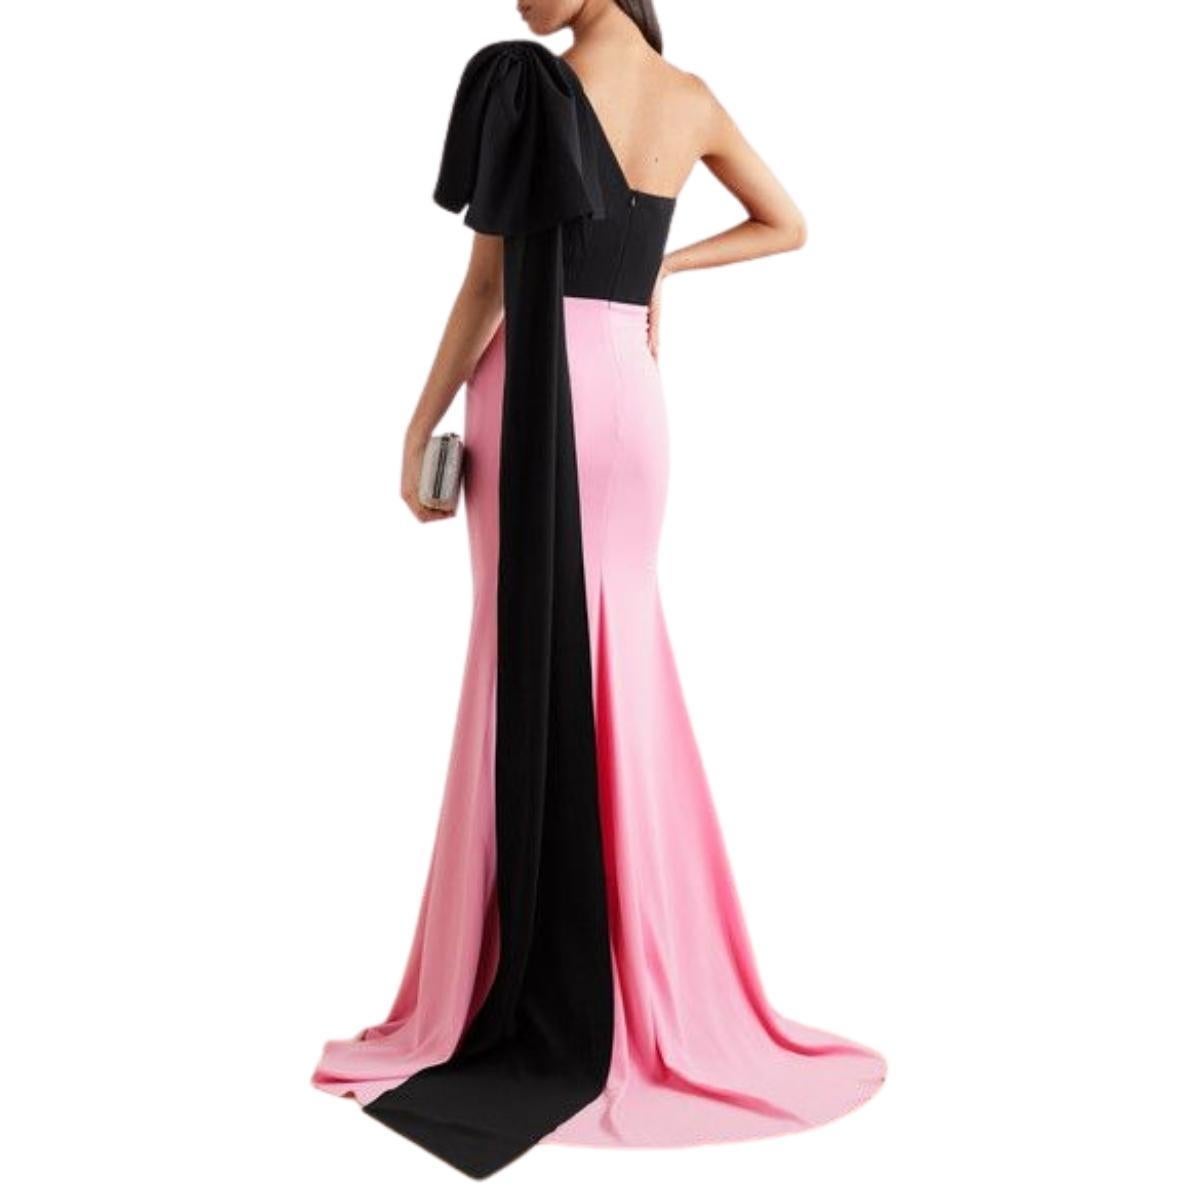 Let all be witness to your elegance with this ravishing two-toned gown that features the splendid combination of bold shades, with Asymmetric neckline, figure-defining silhouette, sleeveless and a magnificent bow sash embellishment that goes from